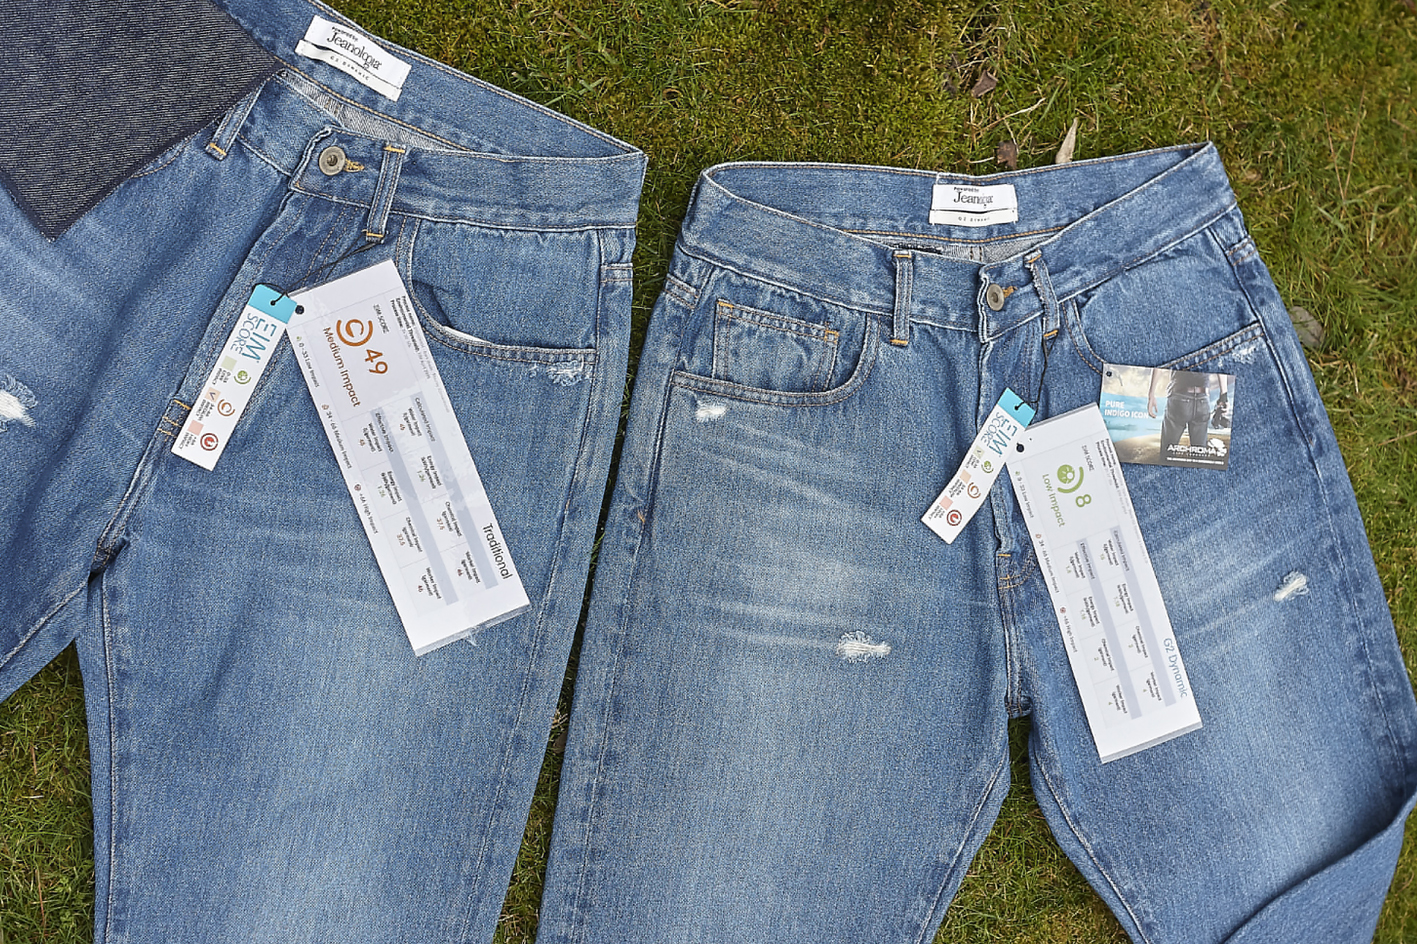 Chemistry of neutralization following the bleaching process with calcium  hypochlorite in denim washing 👖